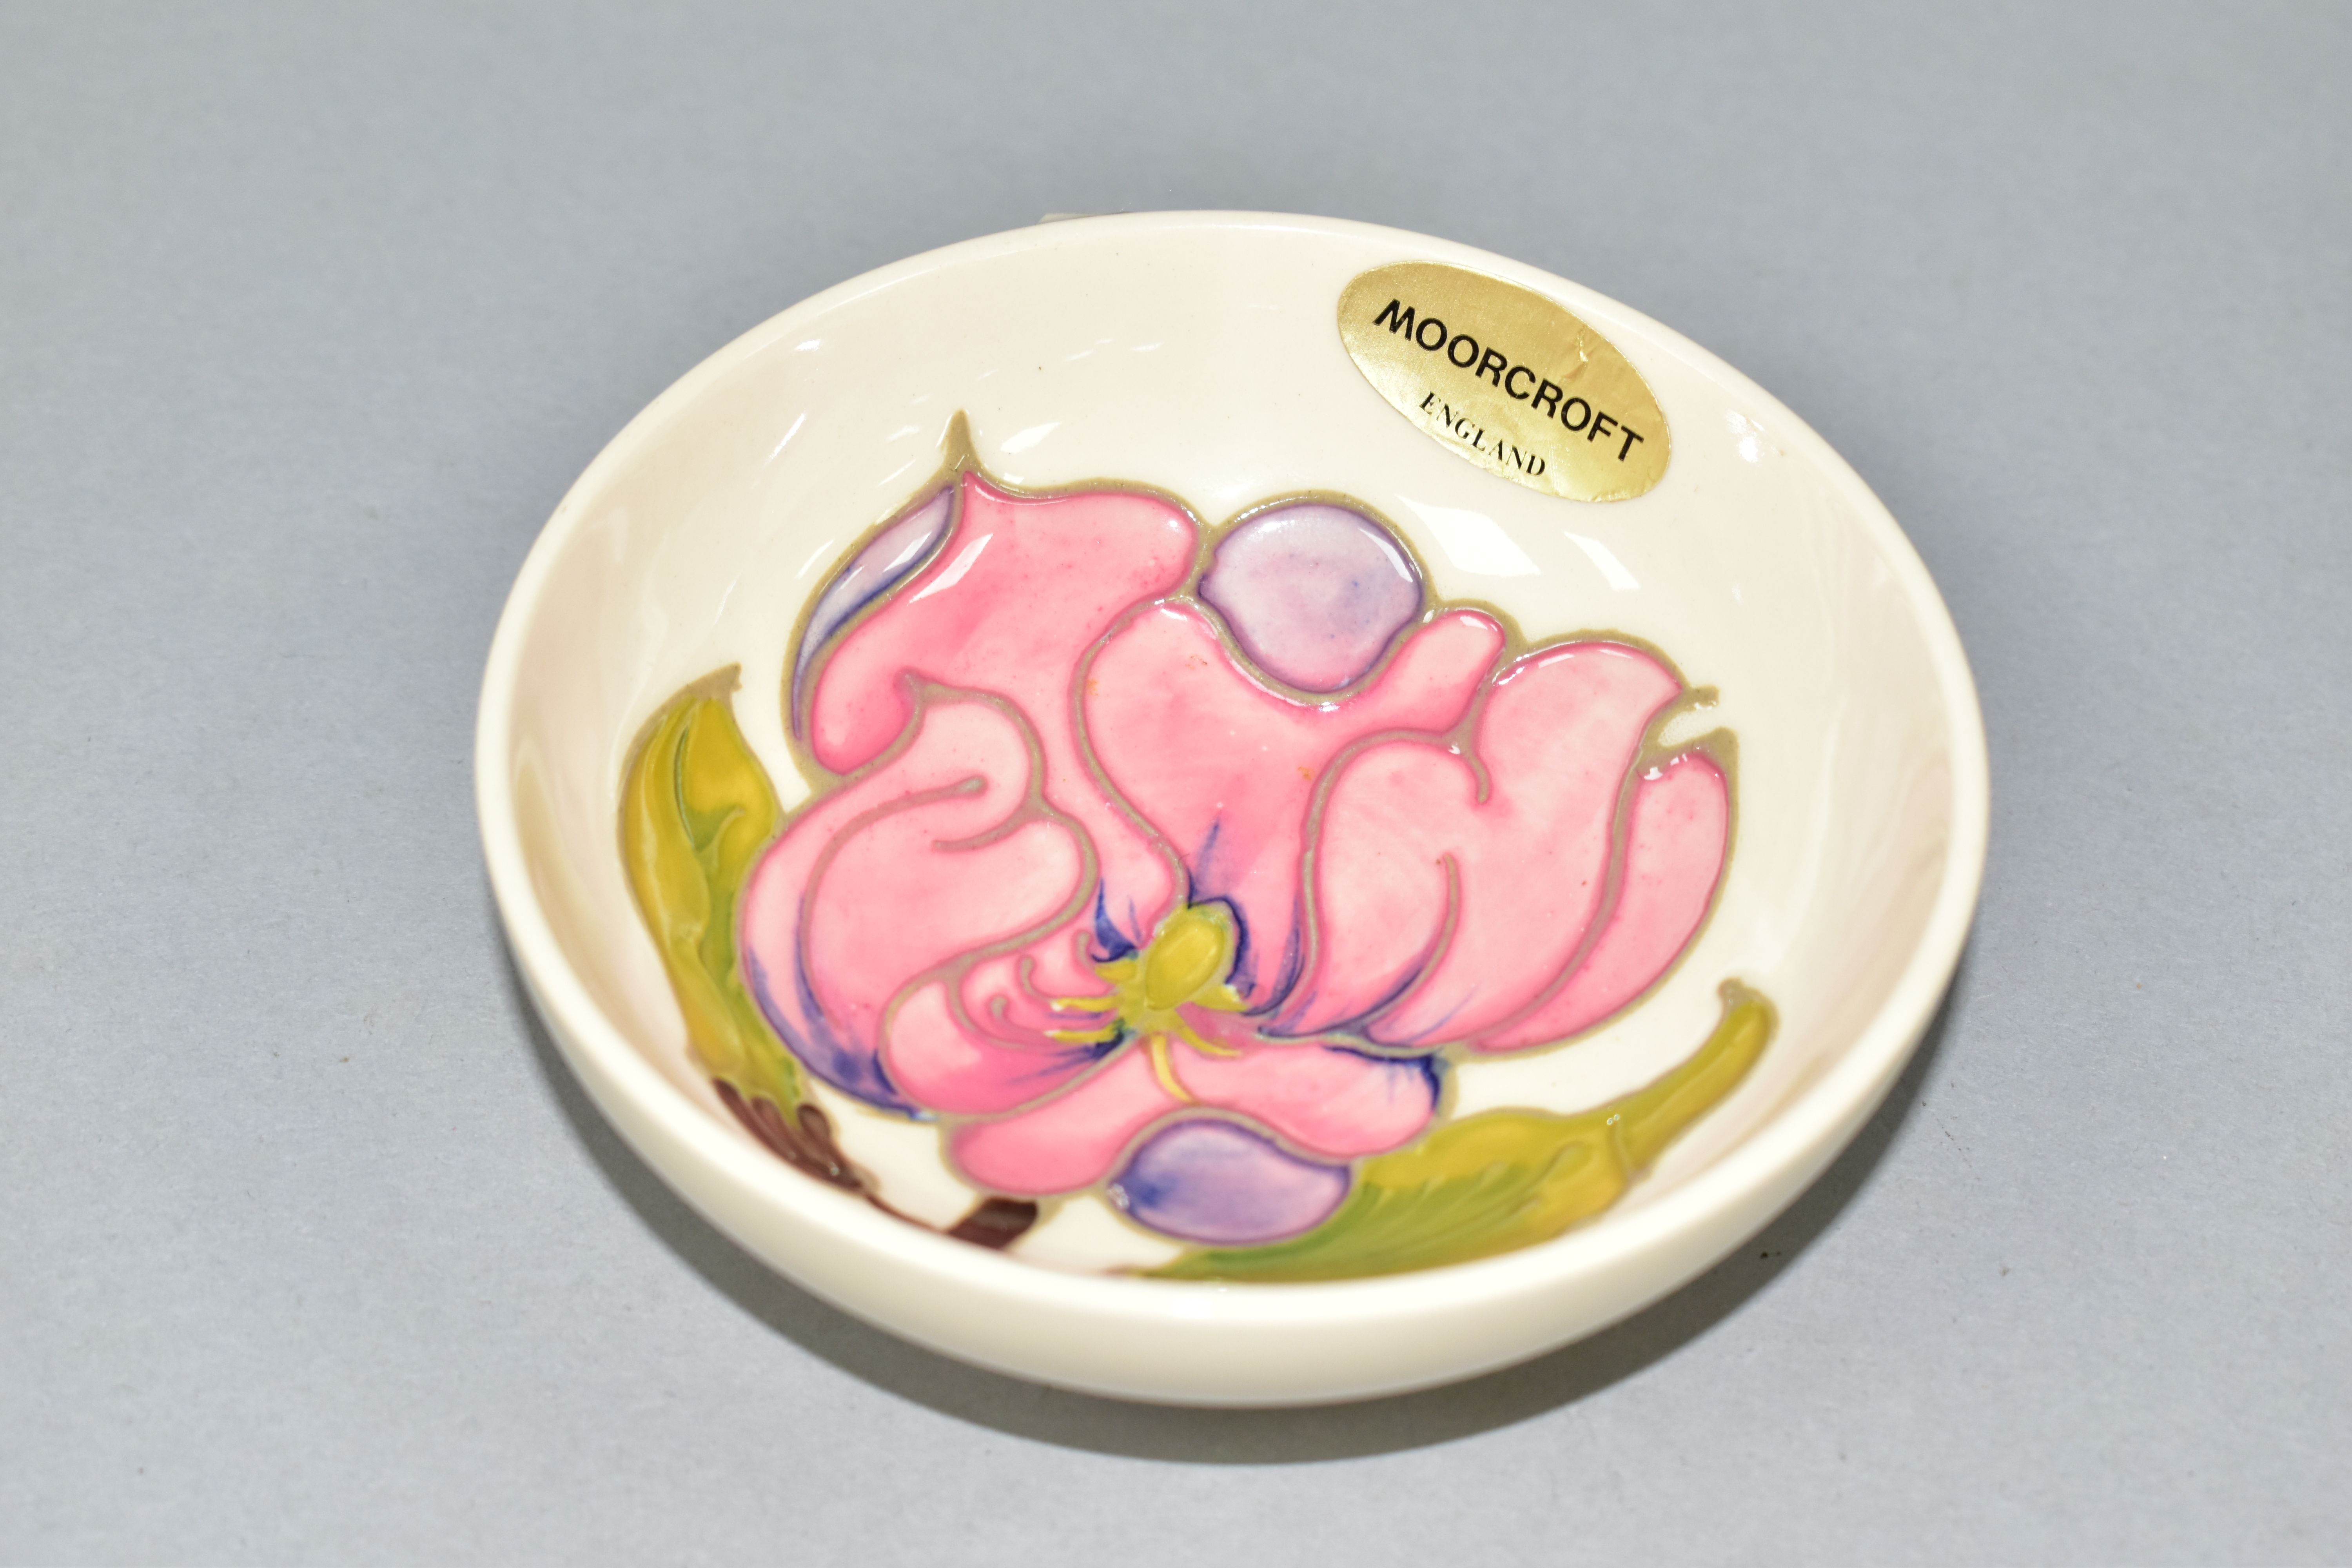 A SMALL MOORCROFT POTTERY MAGNOLIA FOOTED BOWL, with pink magnolia blooms on a cream ground,